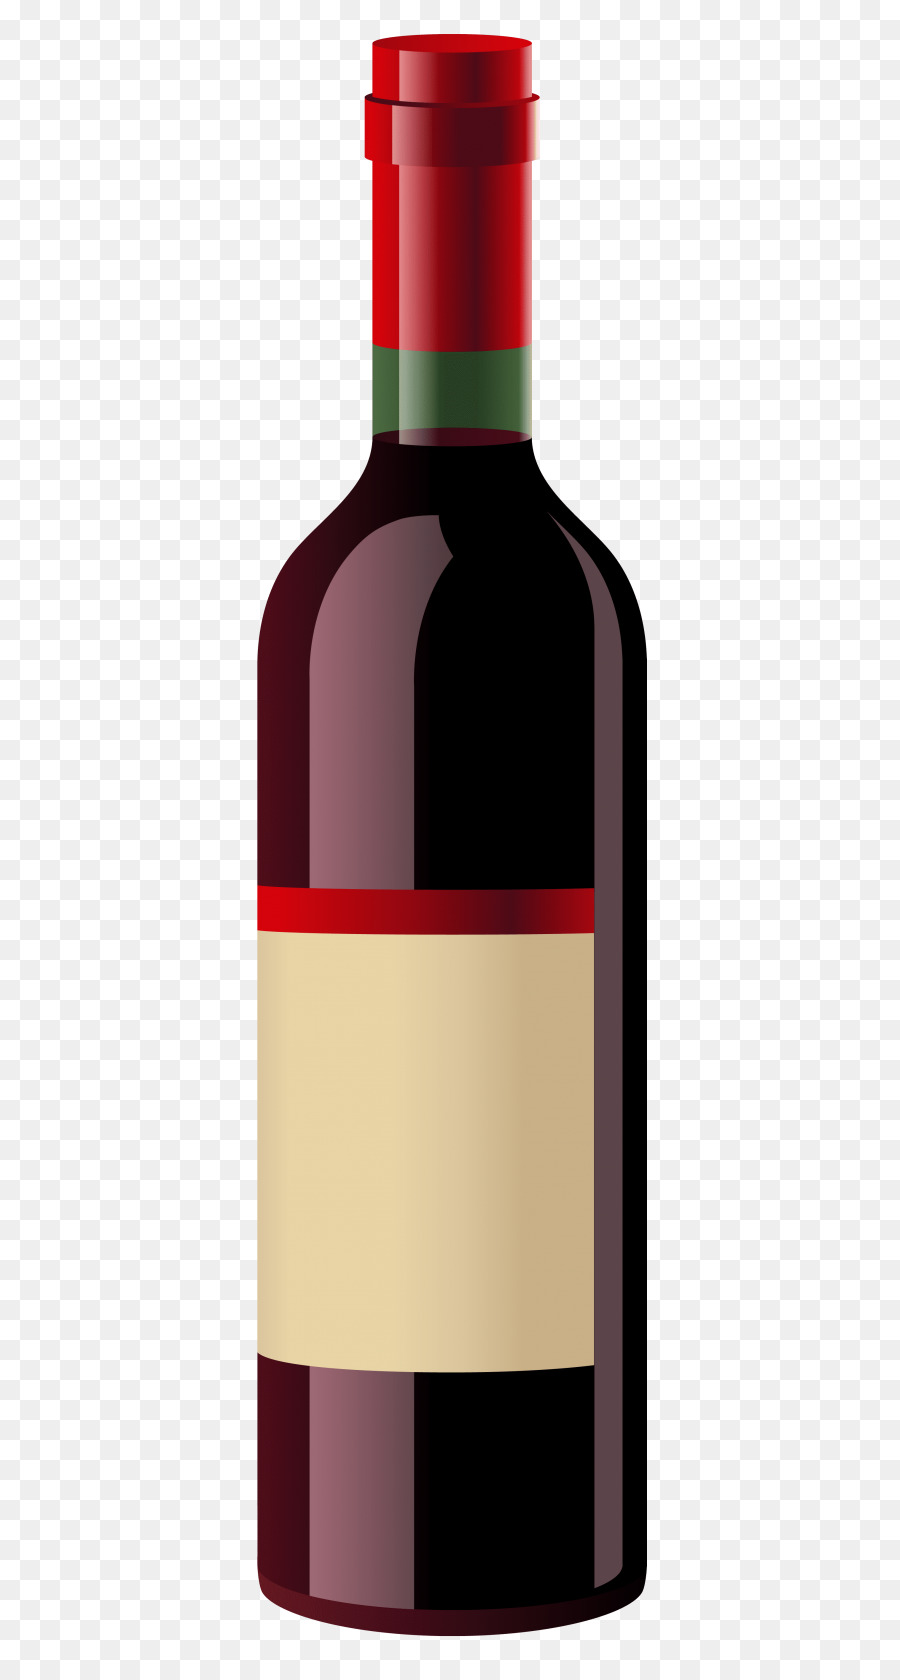 Red Wine White wine Clip art Bottle - wine png download - 481*1668 - Free Transparent Wine png Download.